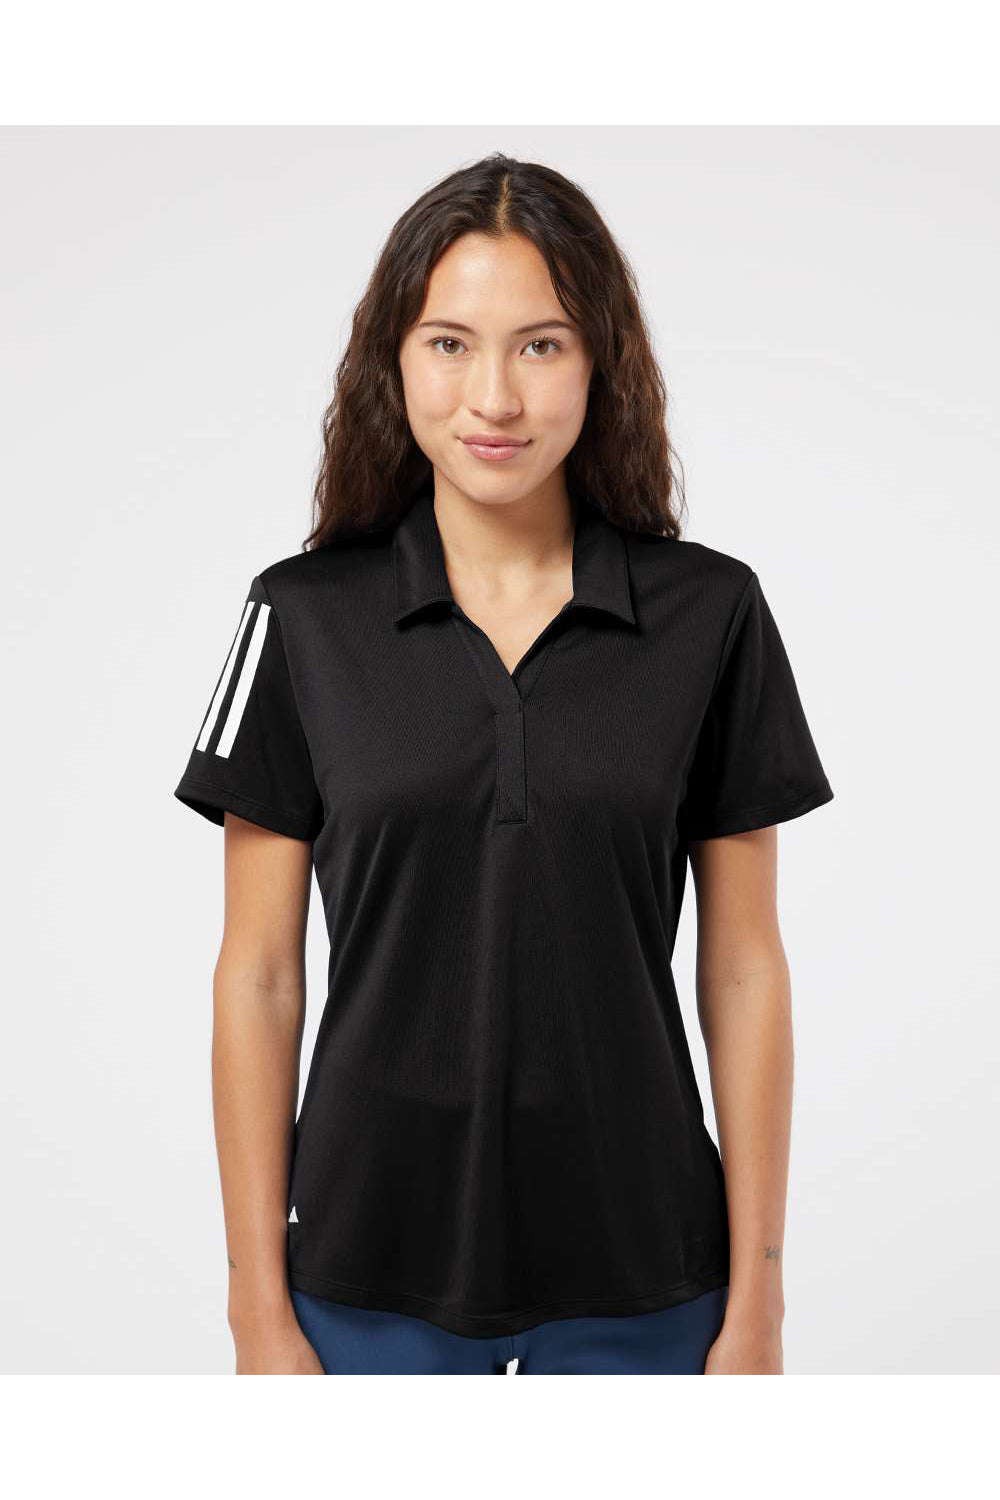 Adidas A481 Womens Floating 3 Stripes Polo Shirt Black/White Model Front